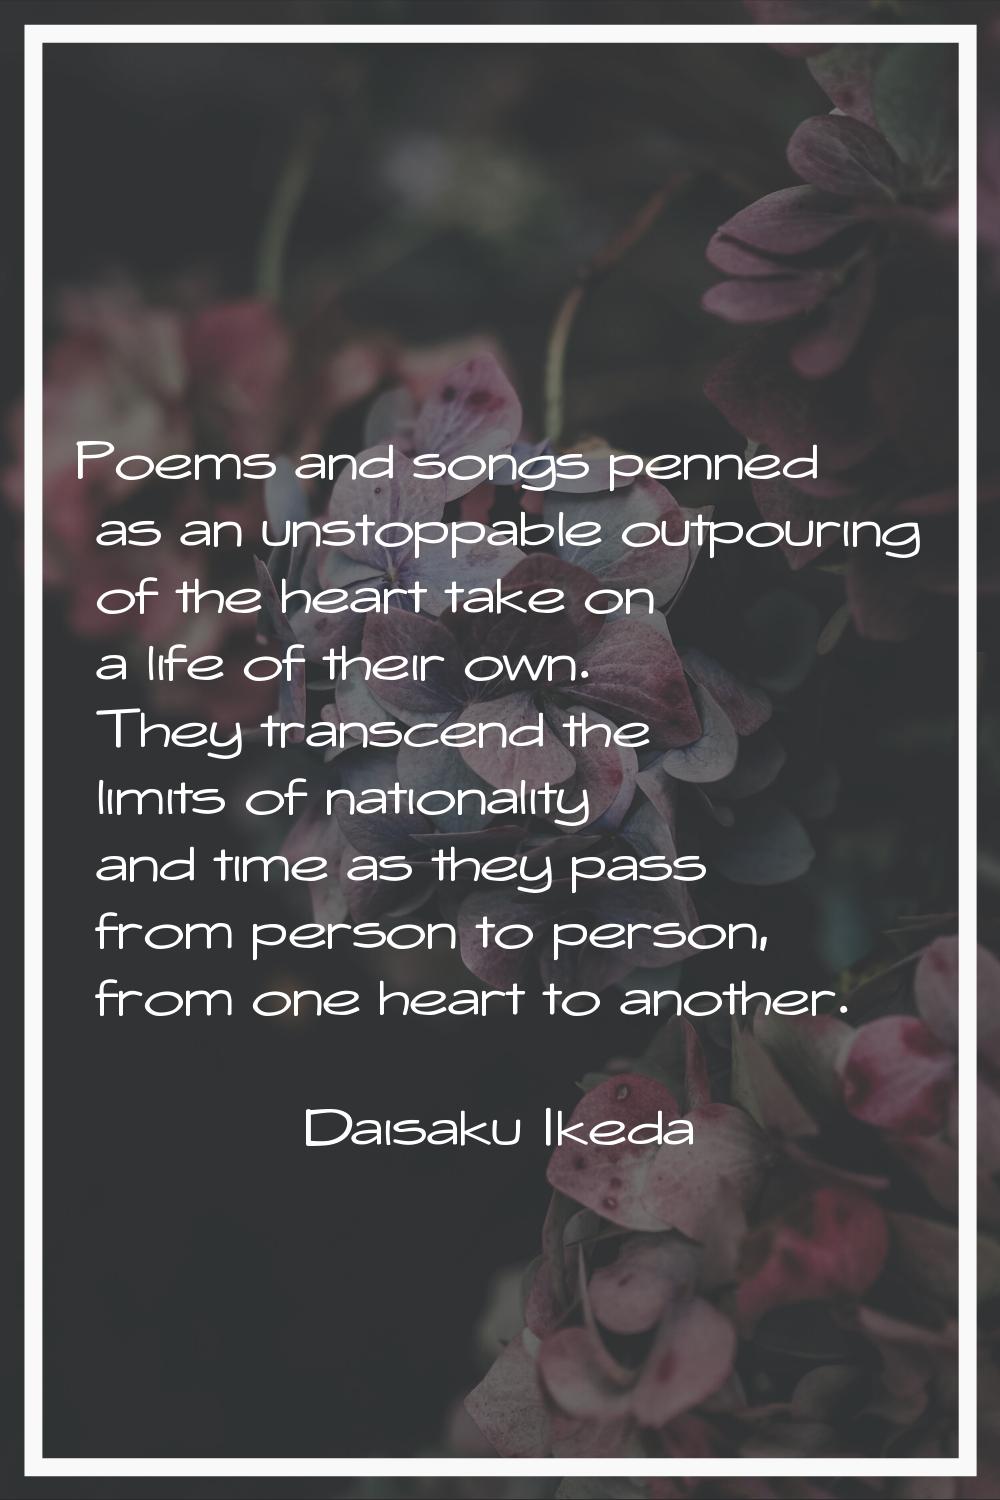 Poems and songs penned as an unstoppable outpouring of the heart take on a life of their own. They 